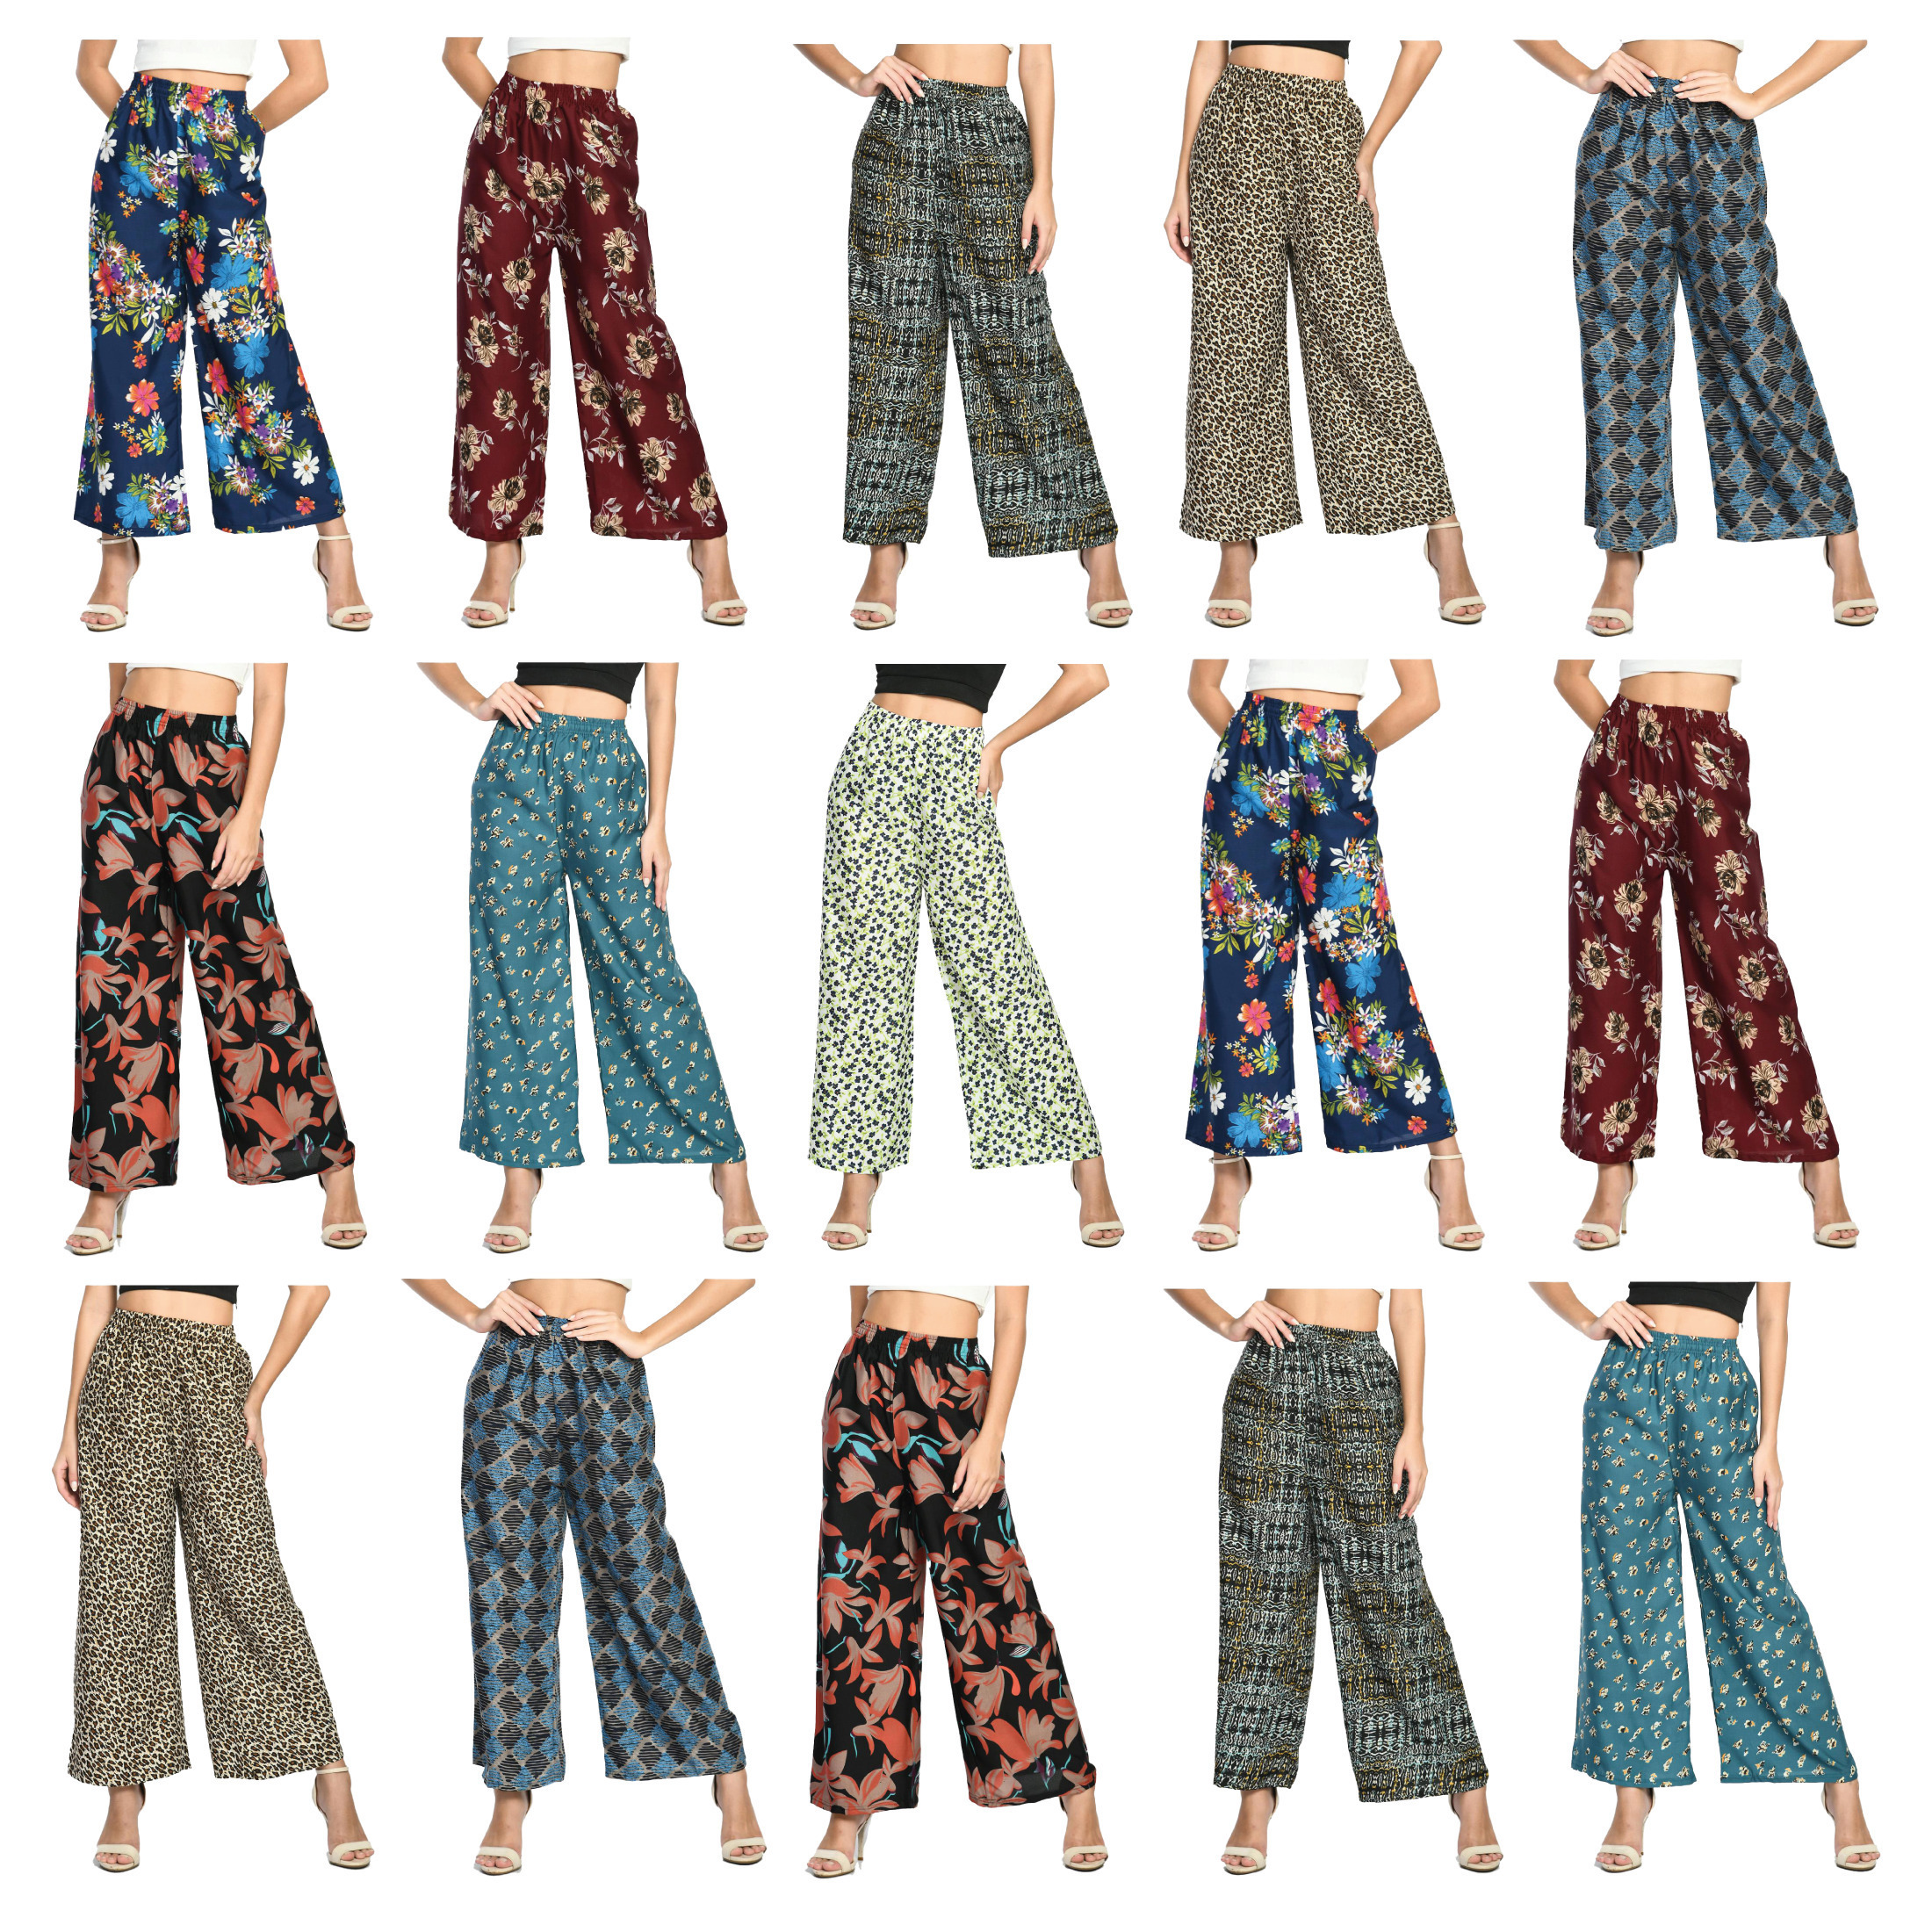 2-Pack: Ladies Soft Cotton Blended Loose Fit Wide Leg Comfort Printed Pants - Small